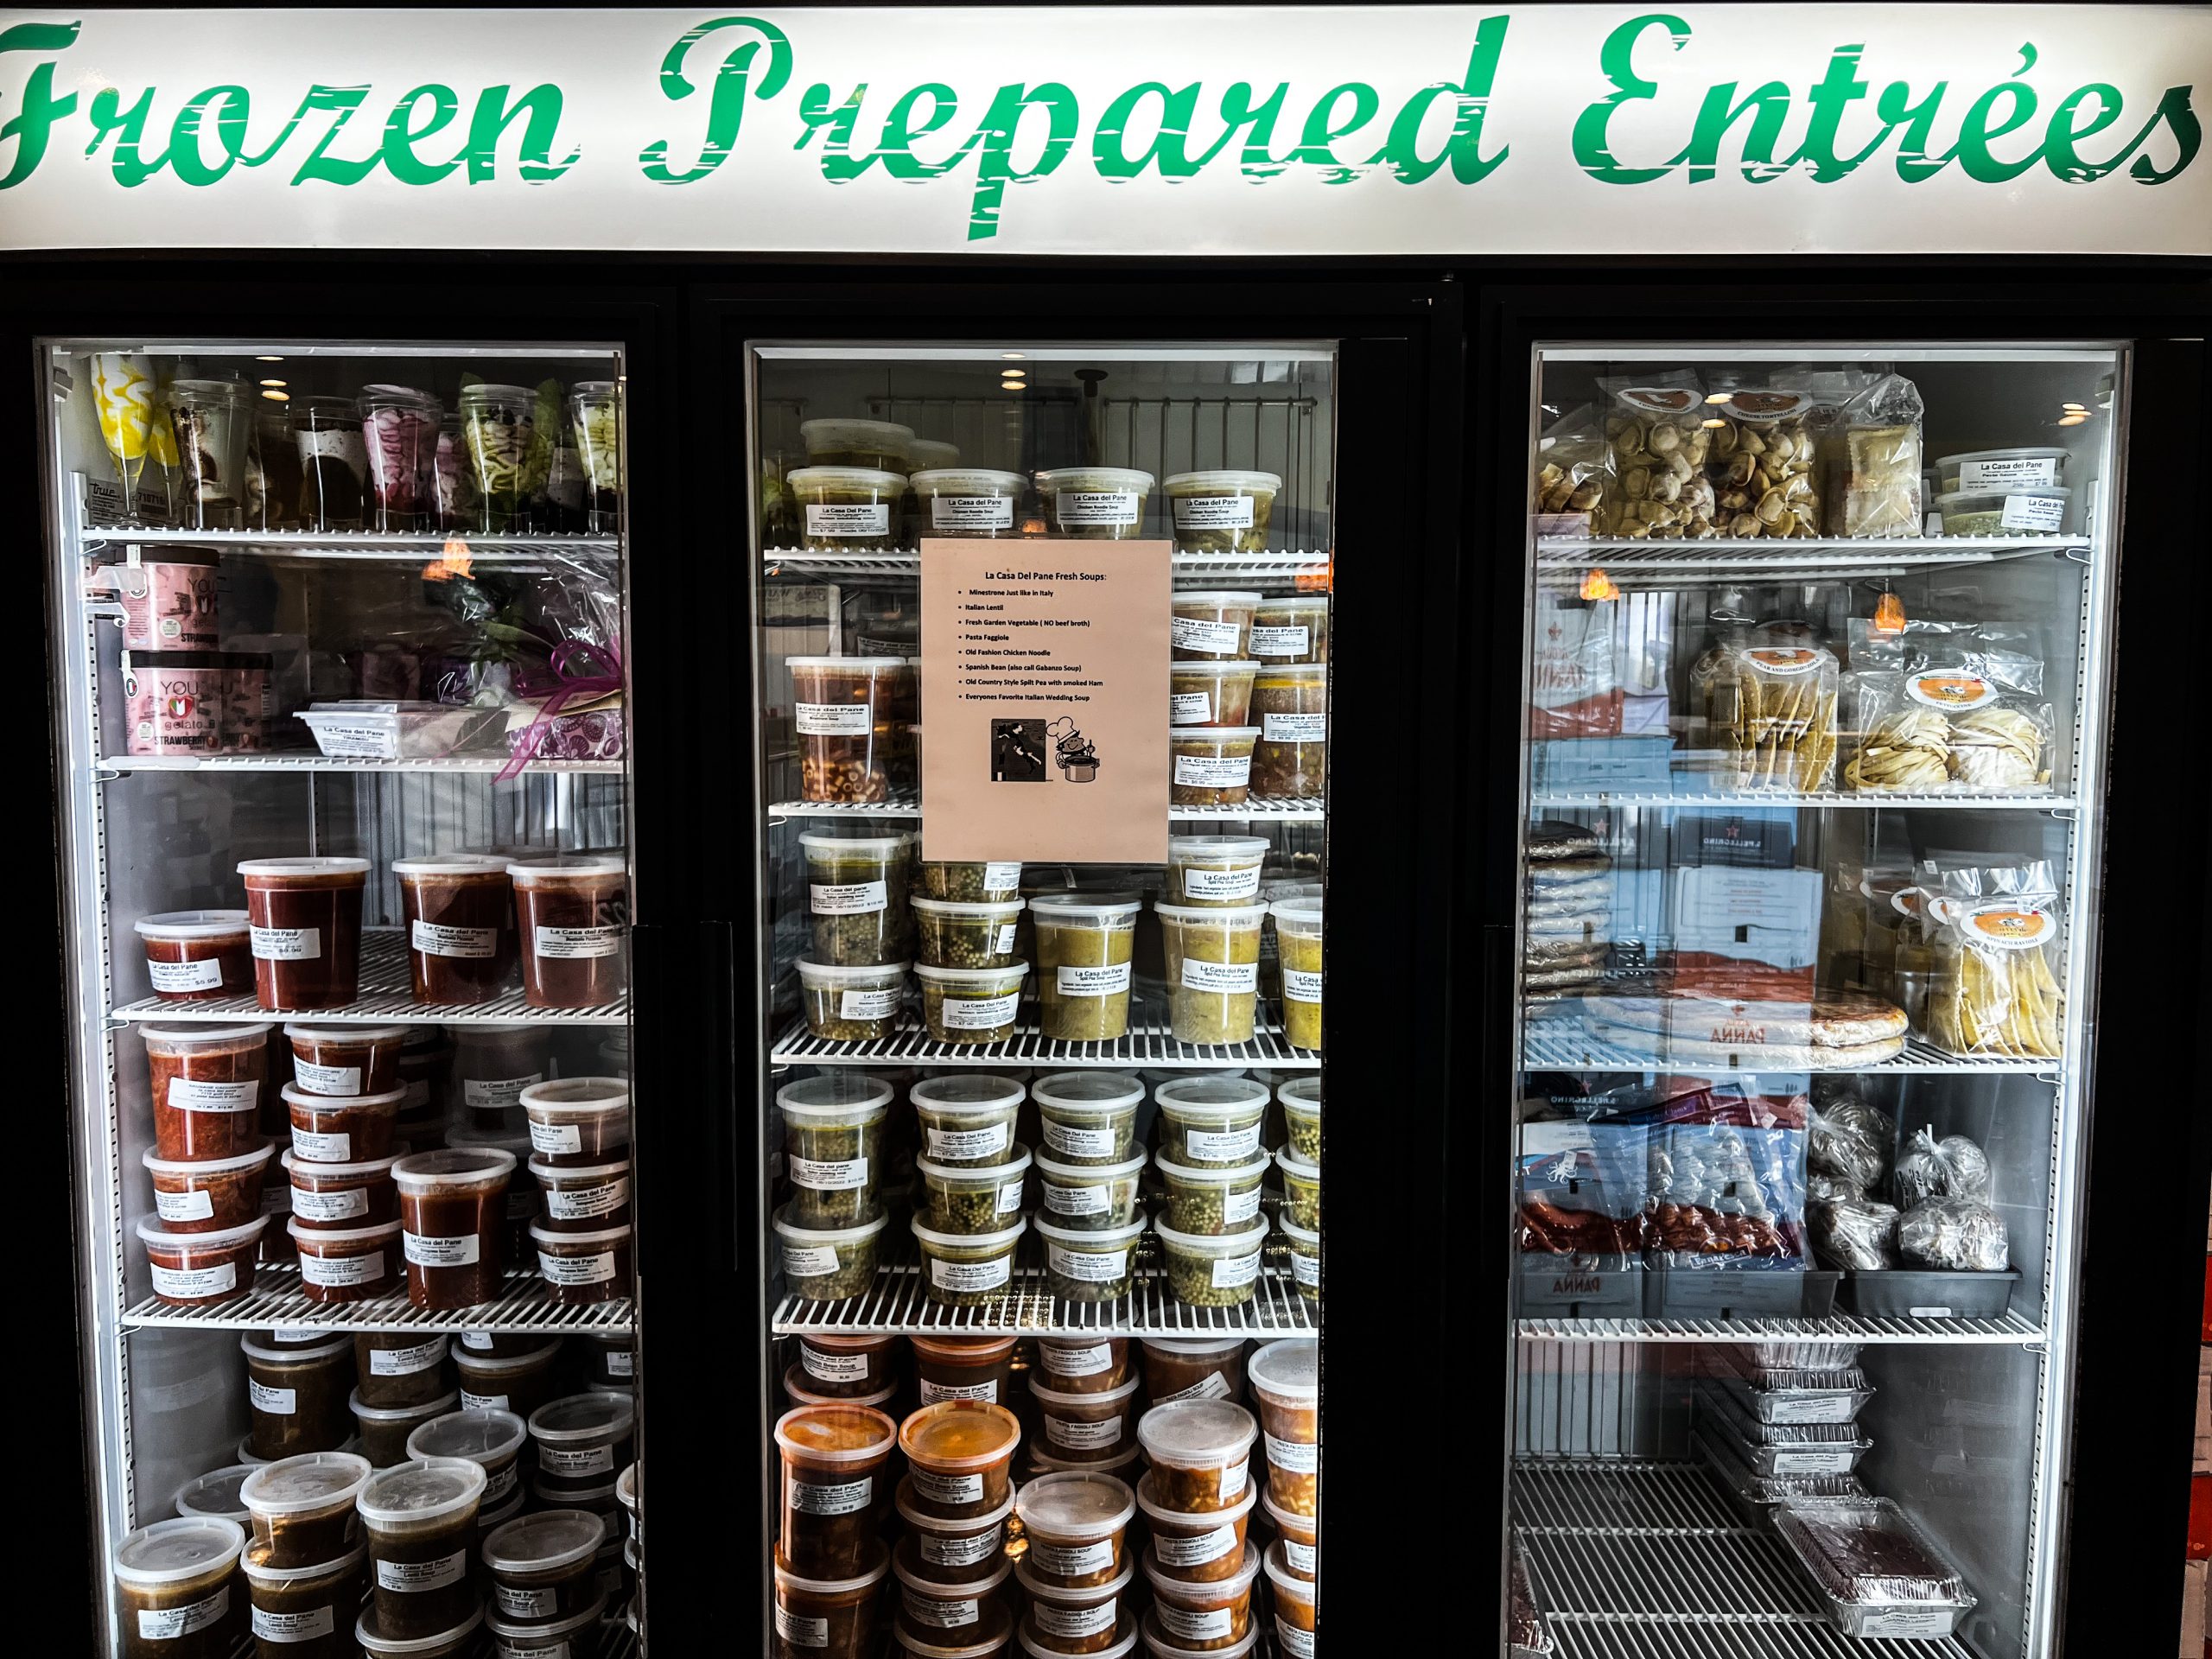 Tons of frozen and prepared items available for grab and go